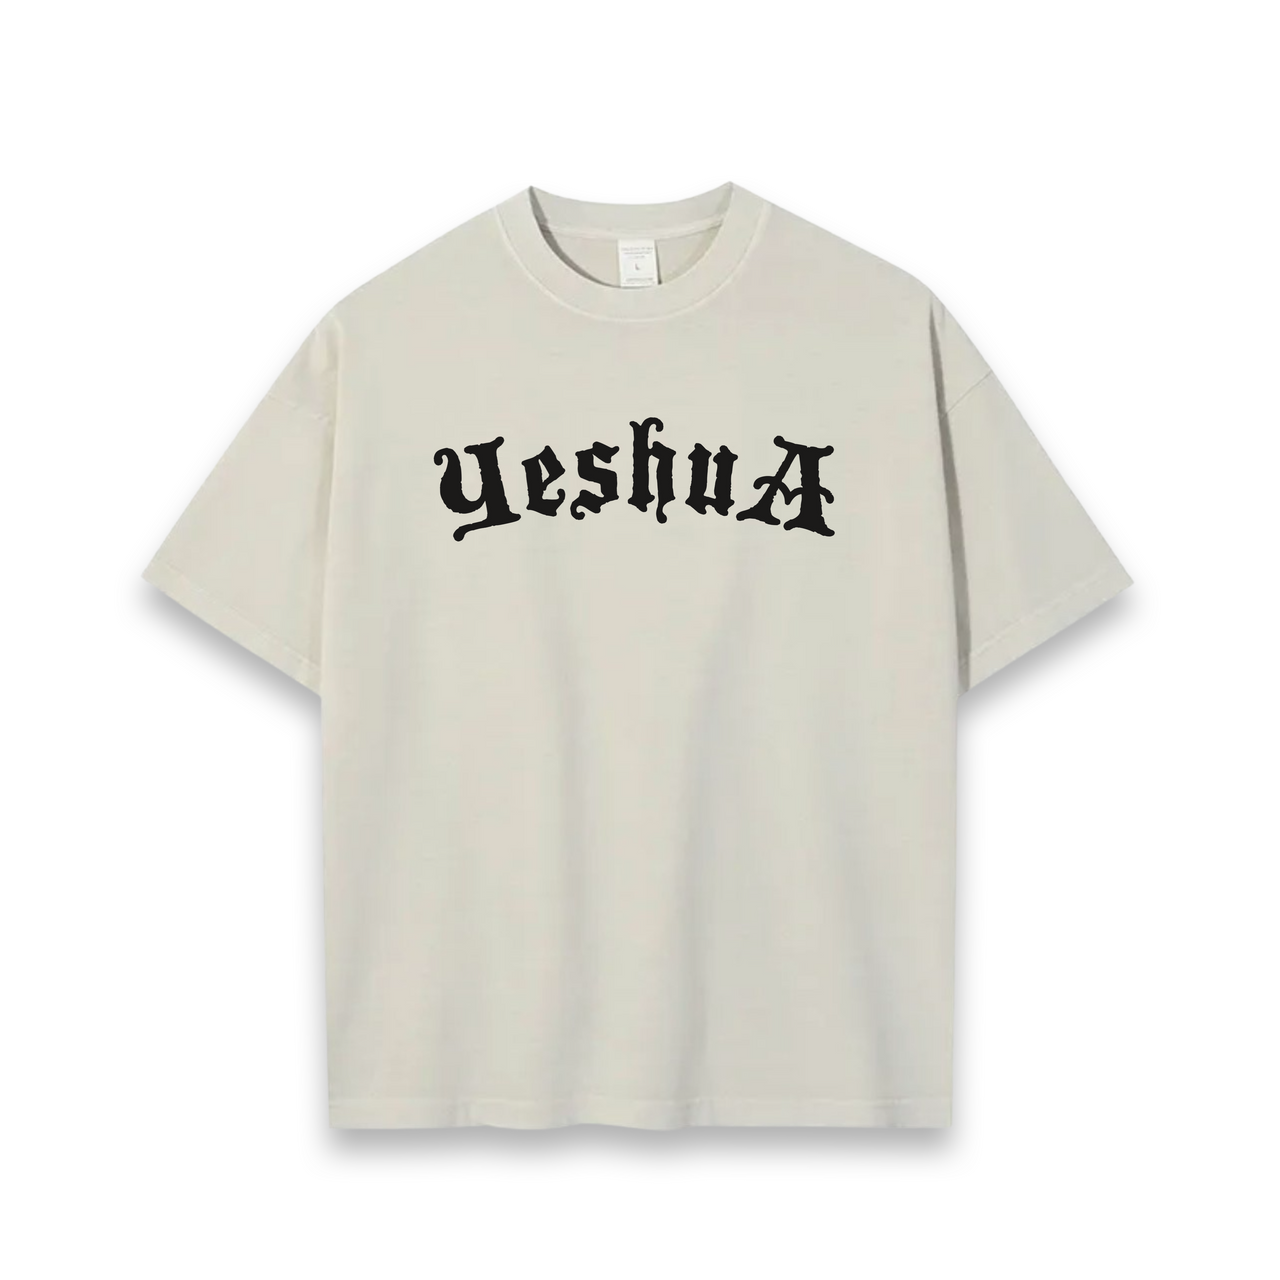 Yeshua Scripture Tee (Relaxed Fit)